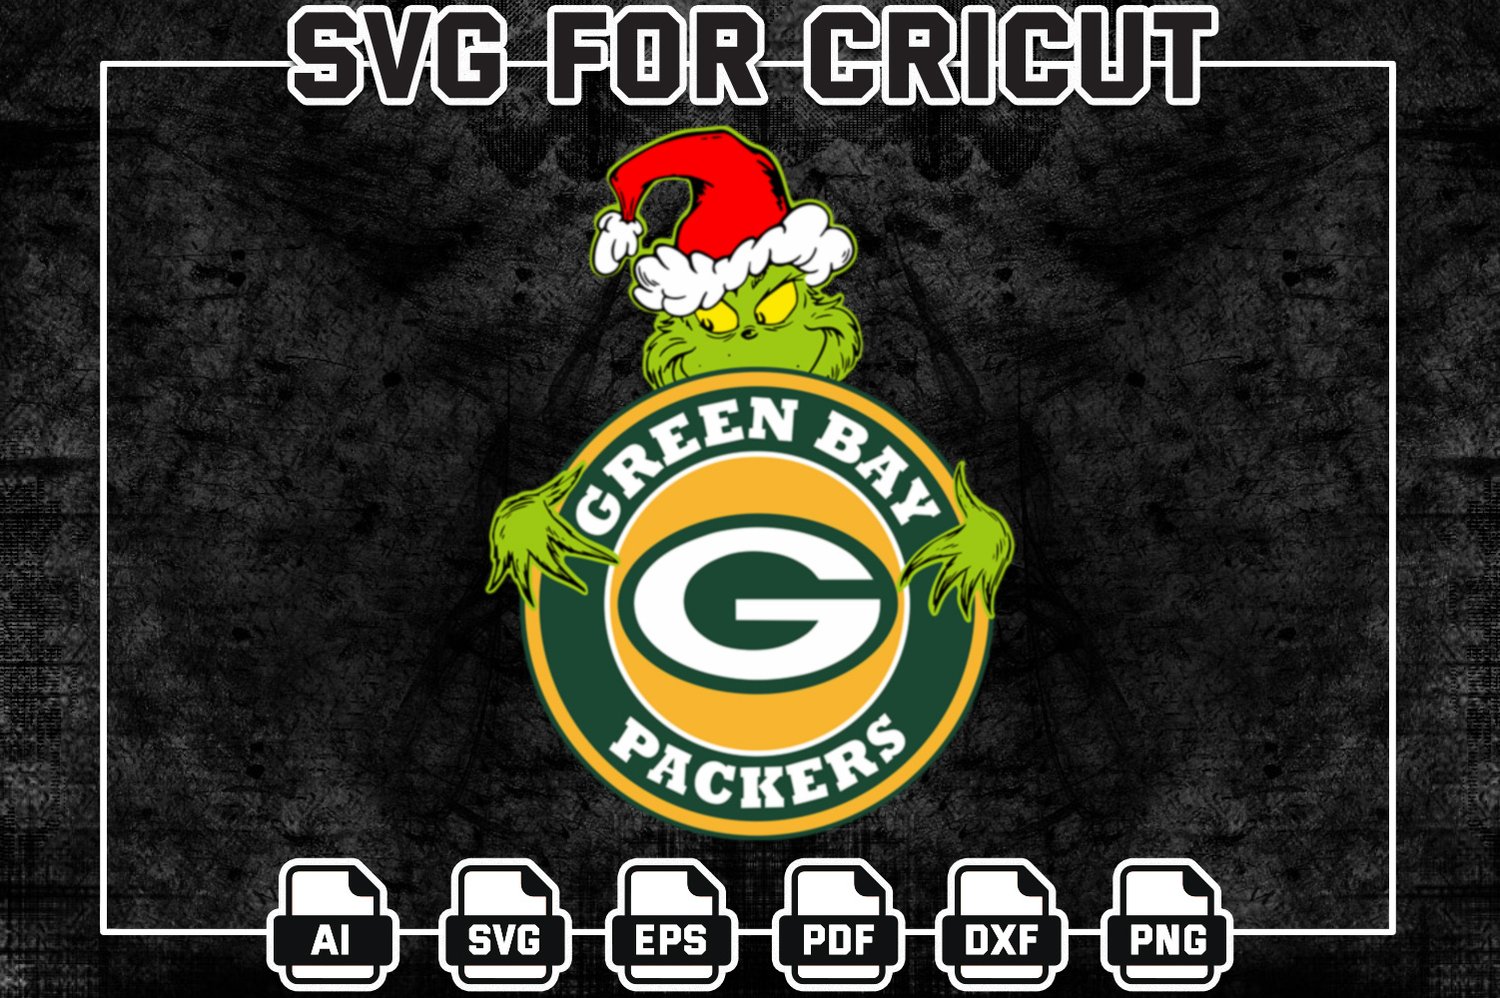 grinch packers